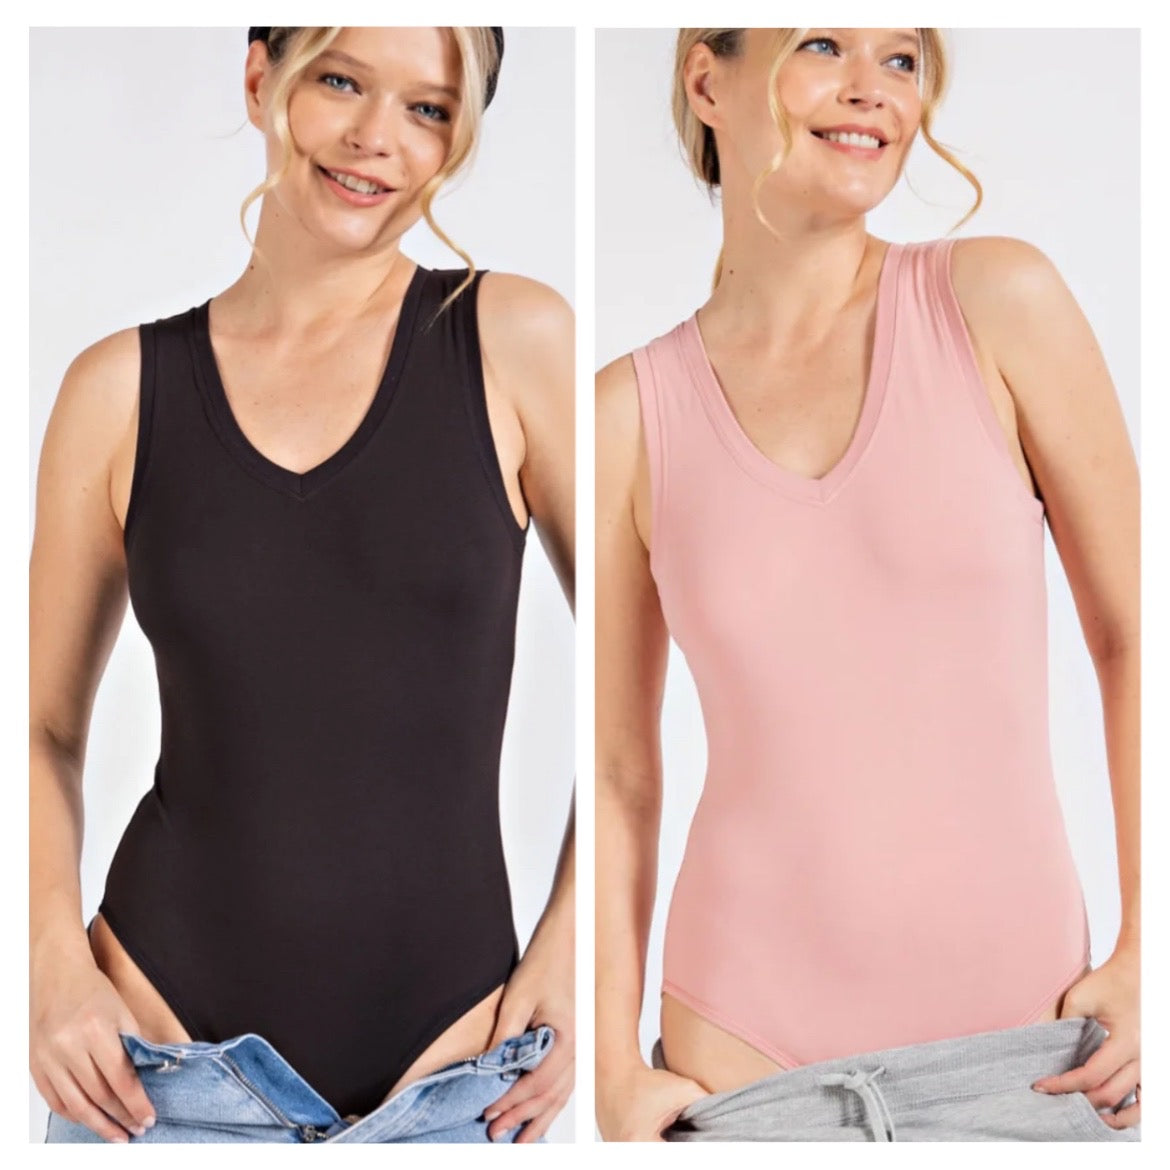 Buttery Soft Essential Bodysuit - BLACK OR PINK!